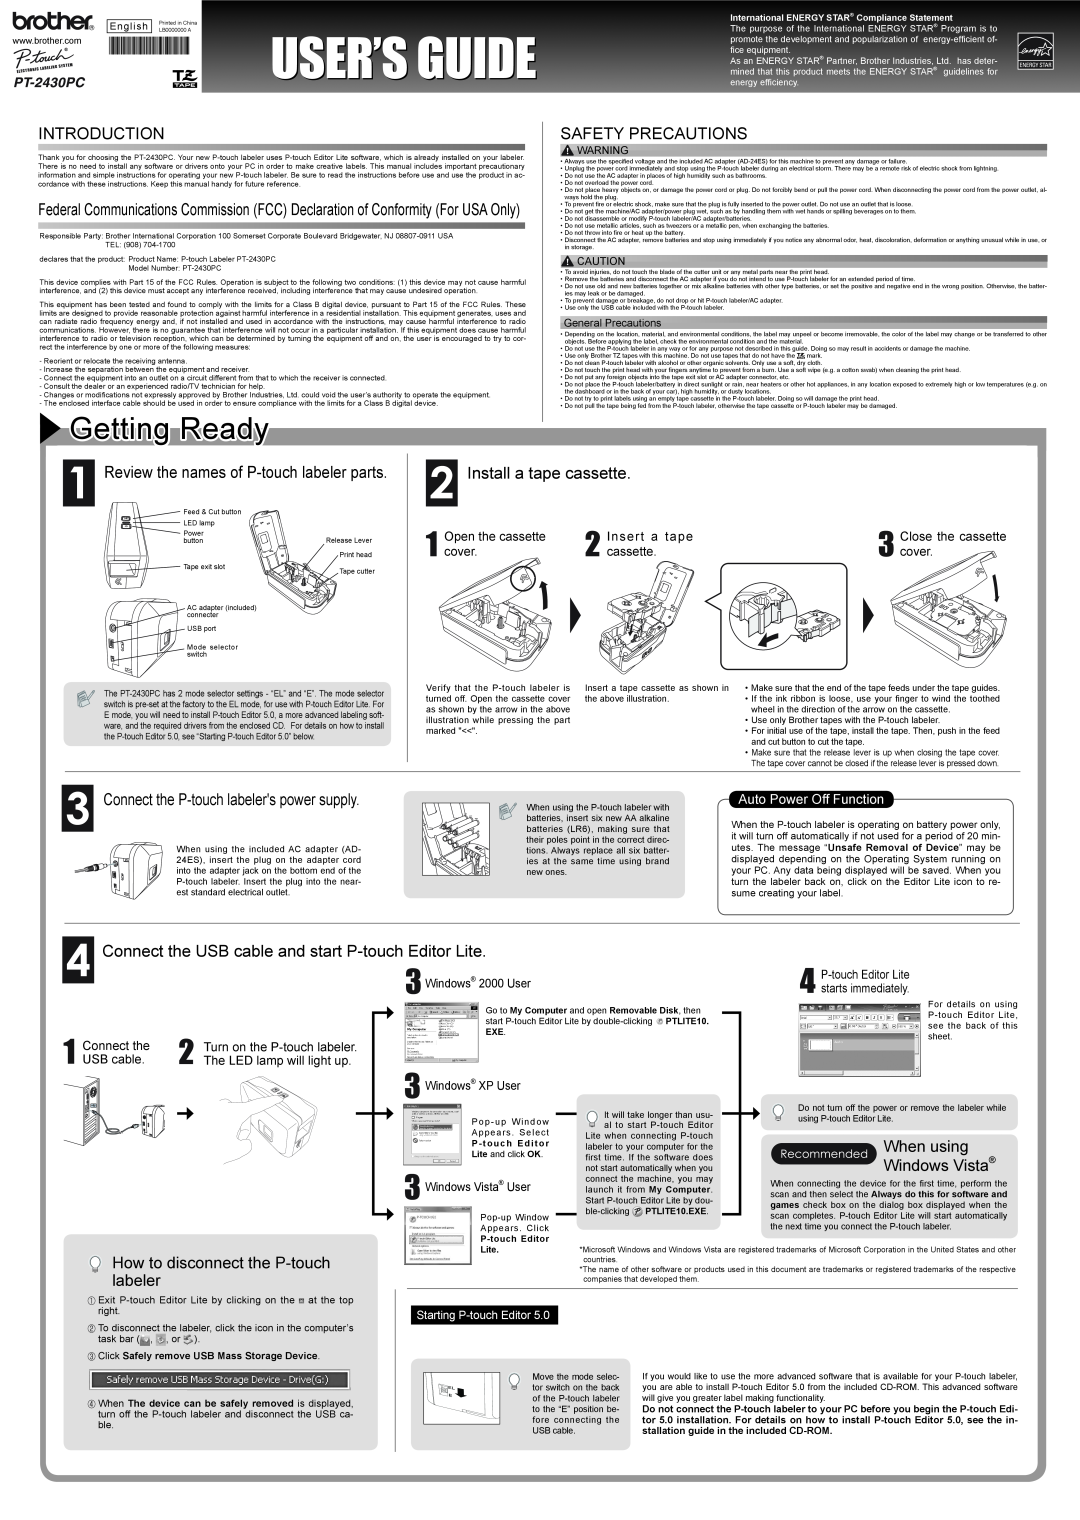 Brother PT-2430PC manual User’S Guide, Getting Ready, Introduction, Safety Precautions, Install a tape cassette 